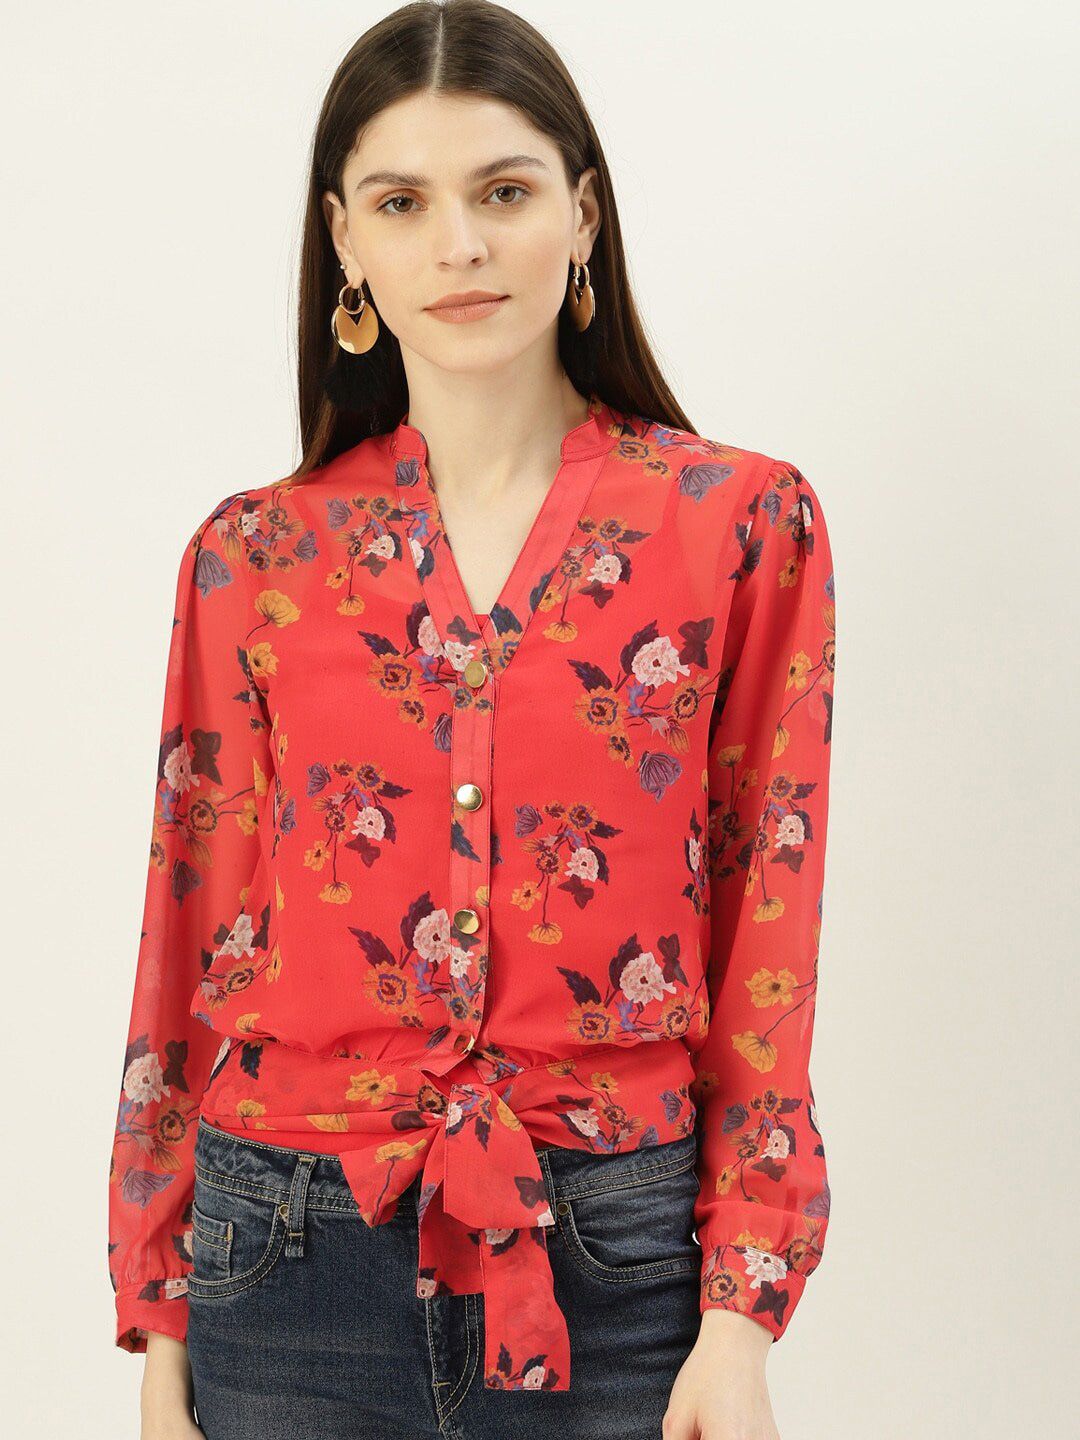 Mast & Harbour Floral Print Mandarin Collar Shirt Style Top Price in India